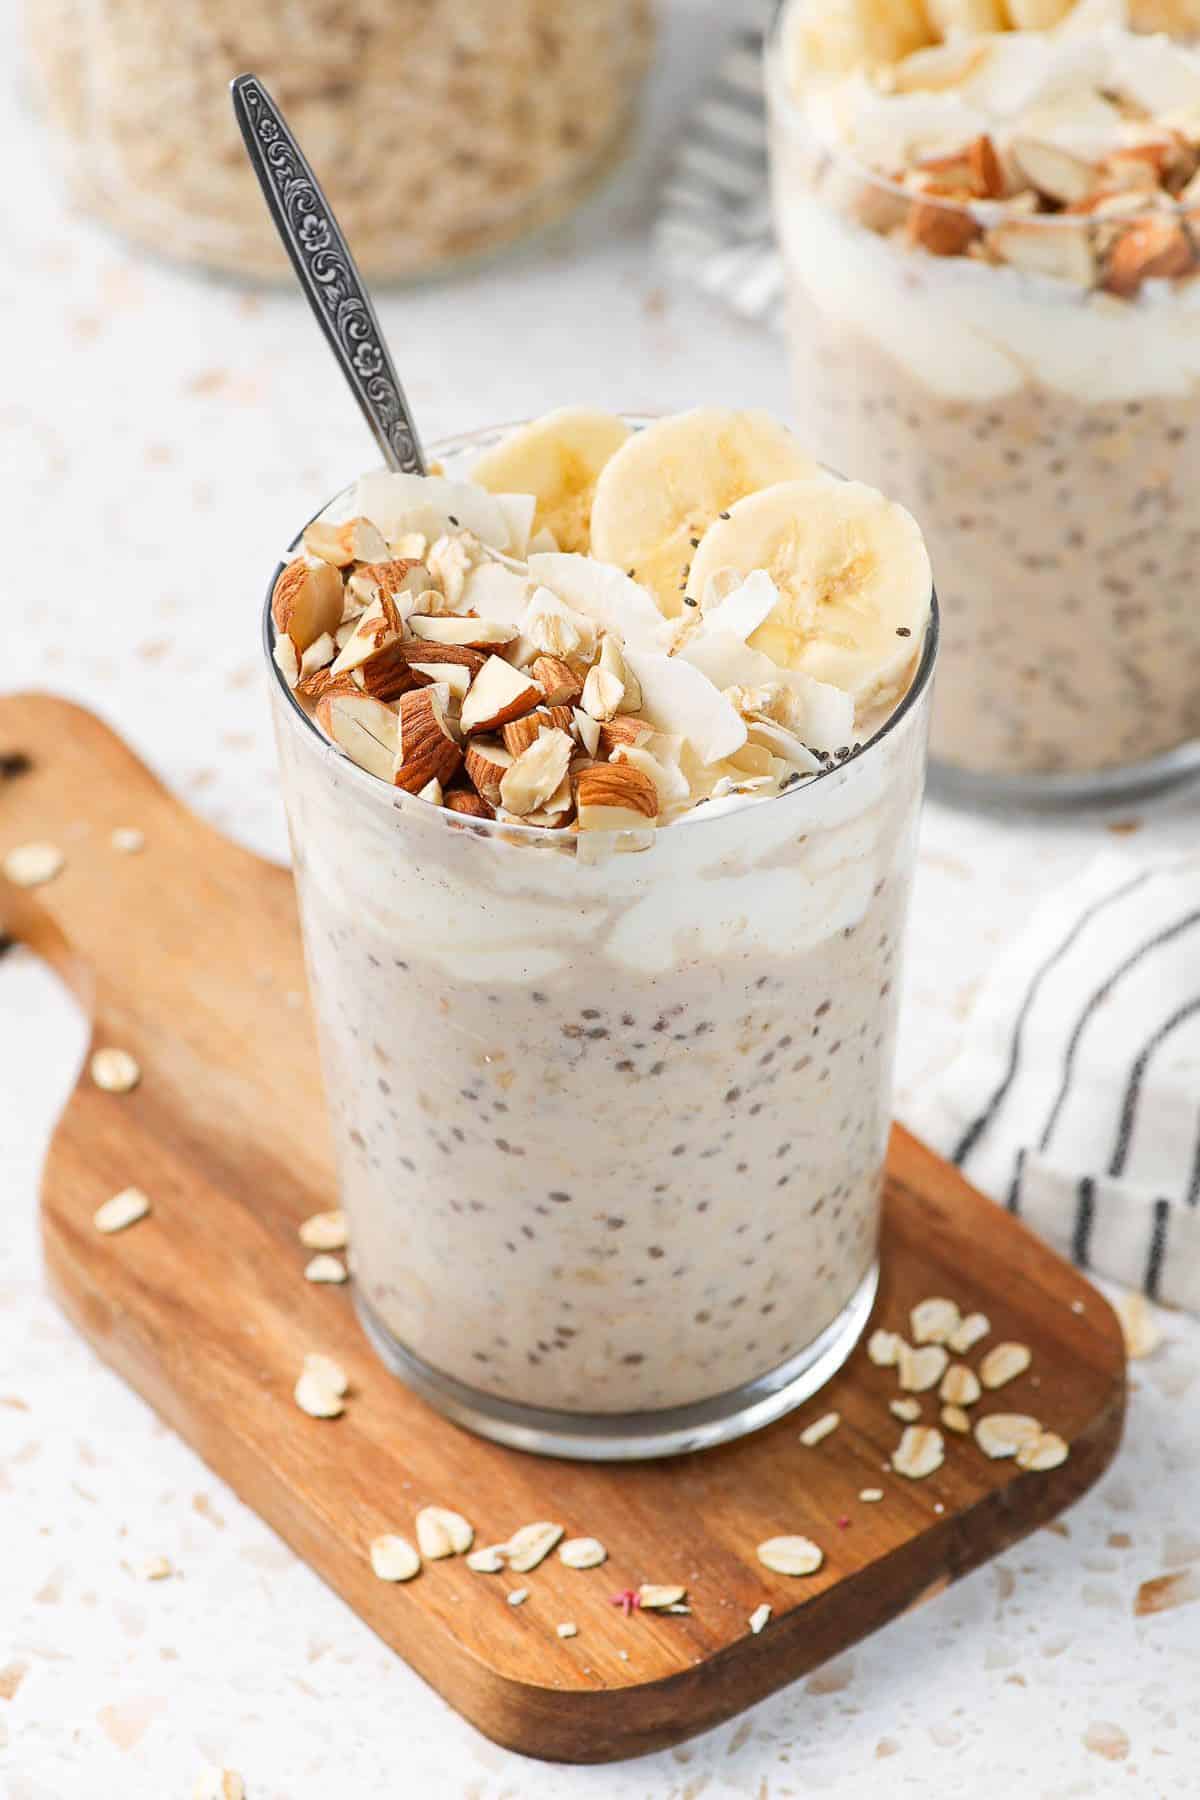 Glass jar of overnight oats, sitting on a wooden board, with a spoon in the jar.